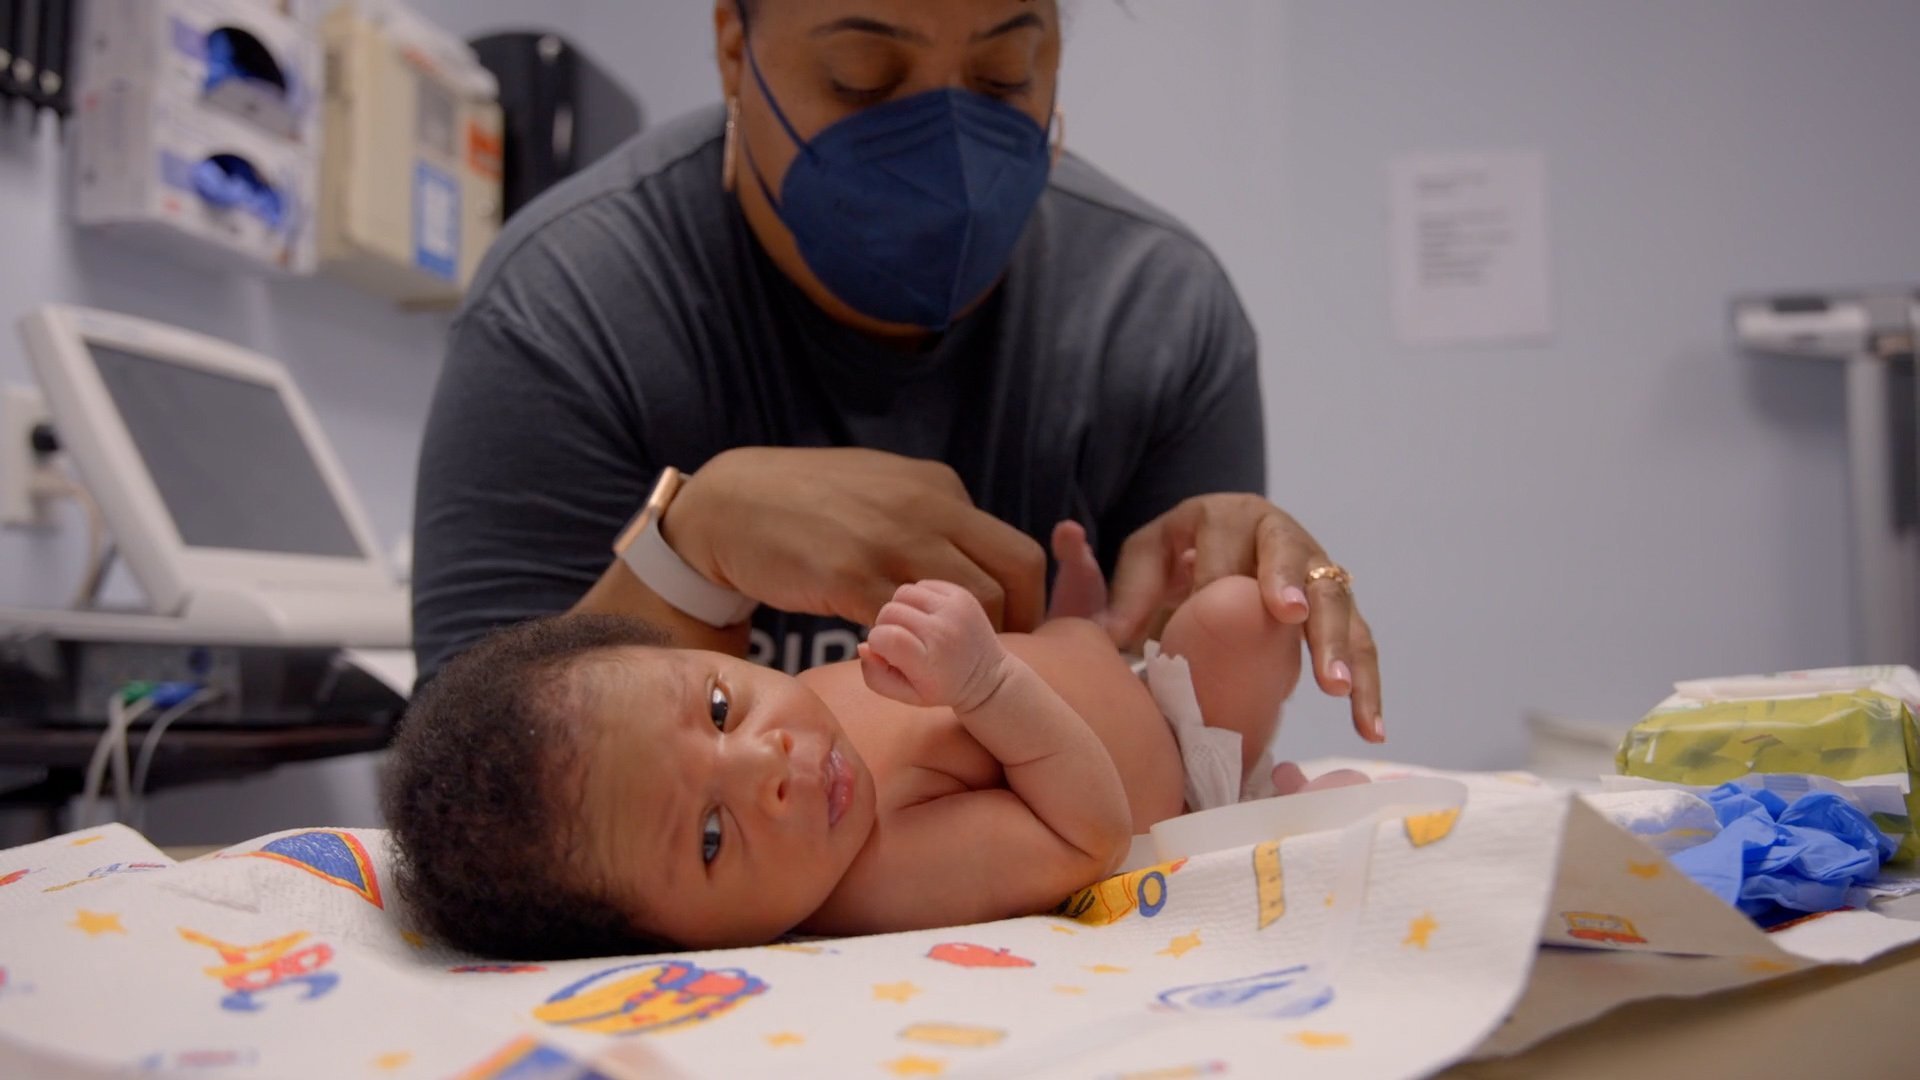 Maternity Wards Are Fraught for Many Black Patients. Meet Someone